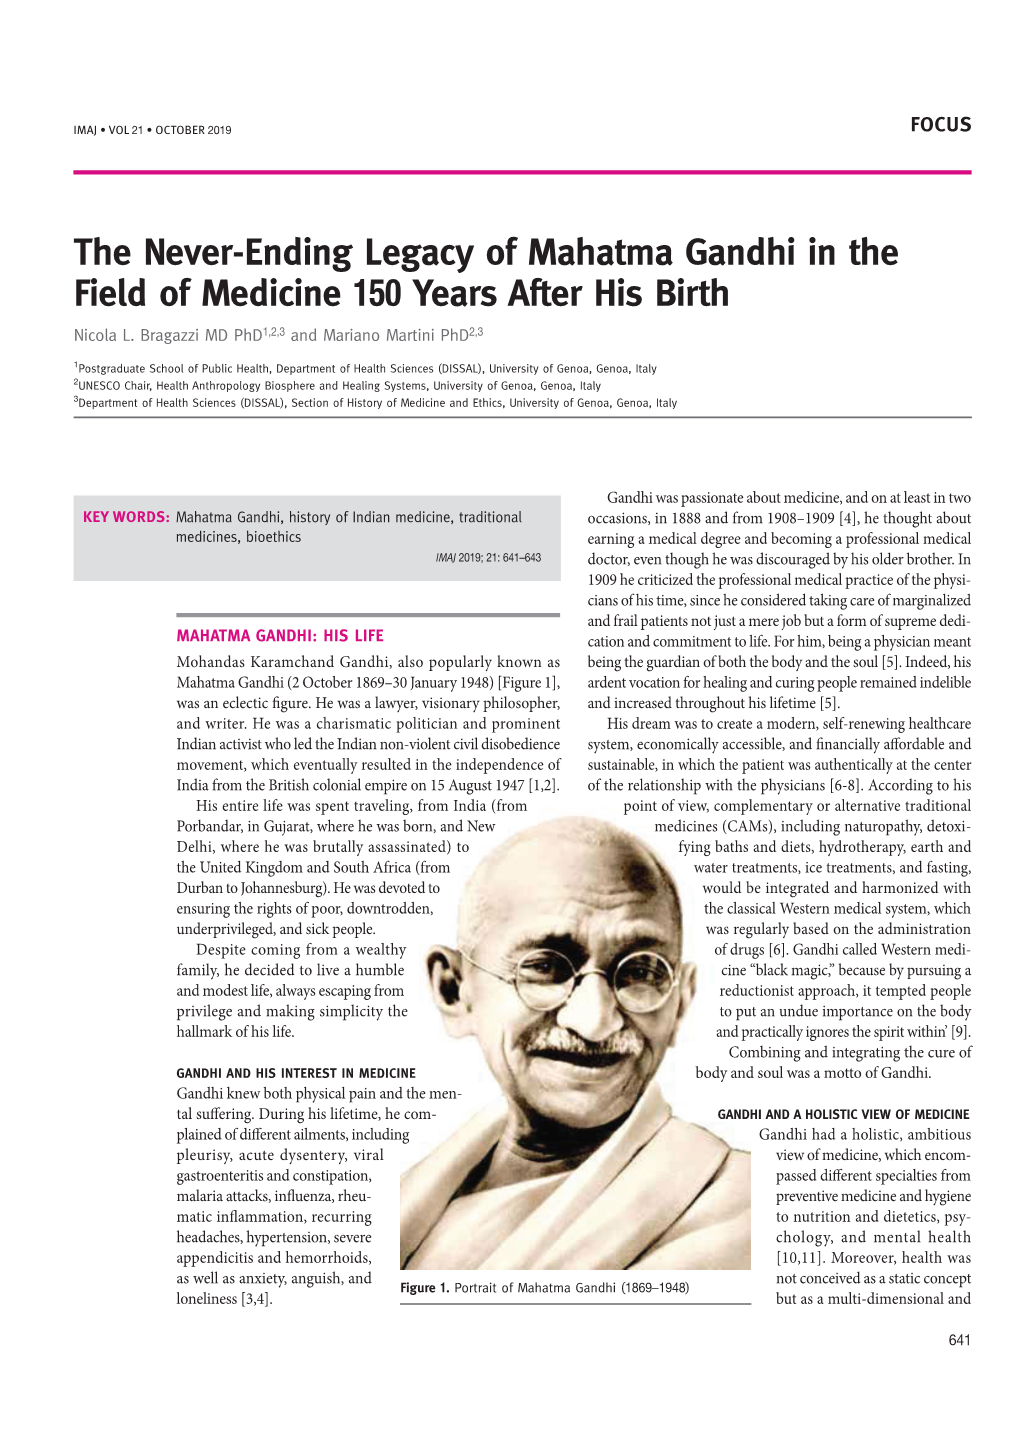 The Never-Ending Legacy of Mahatma Gandhi in the Field of Medicine 150 Years After His Birth Nicola L